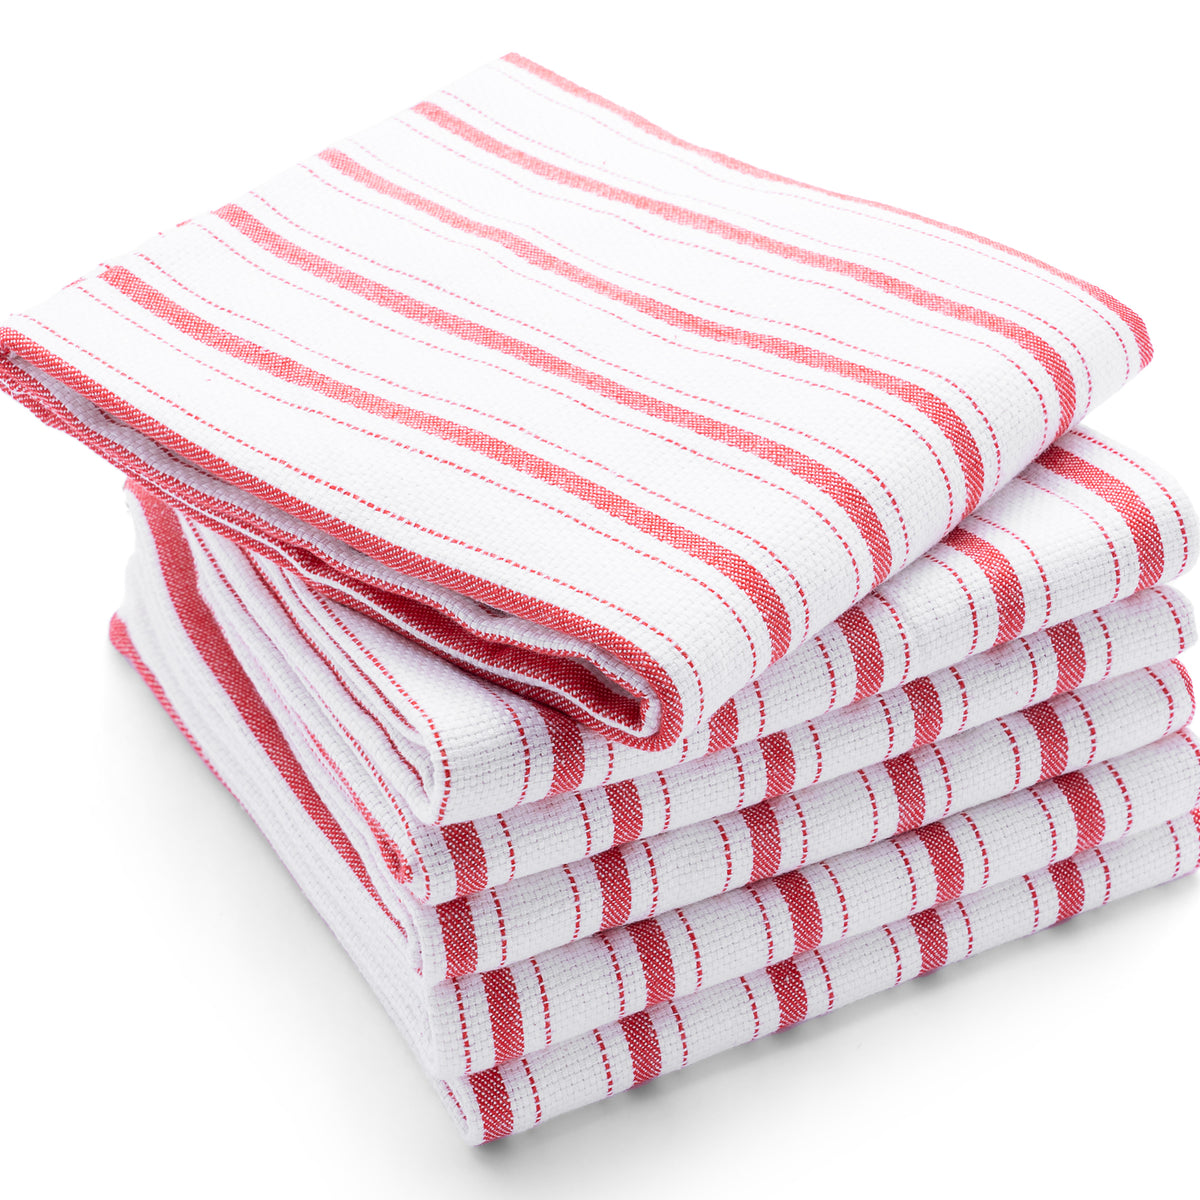 Stitch and Weft 3-Pack Striped Kitchen Tea Towels Size 28x18